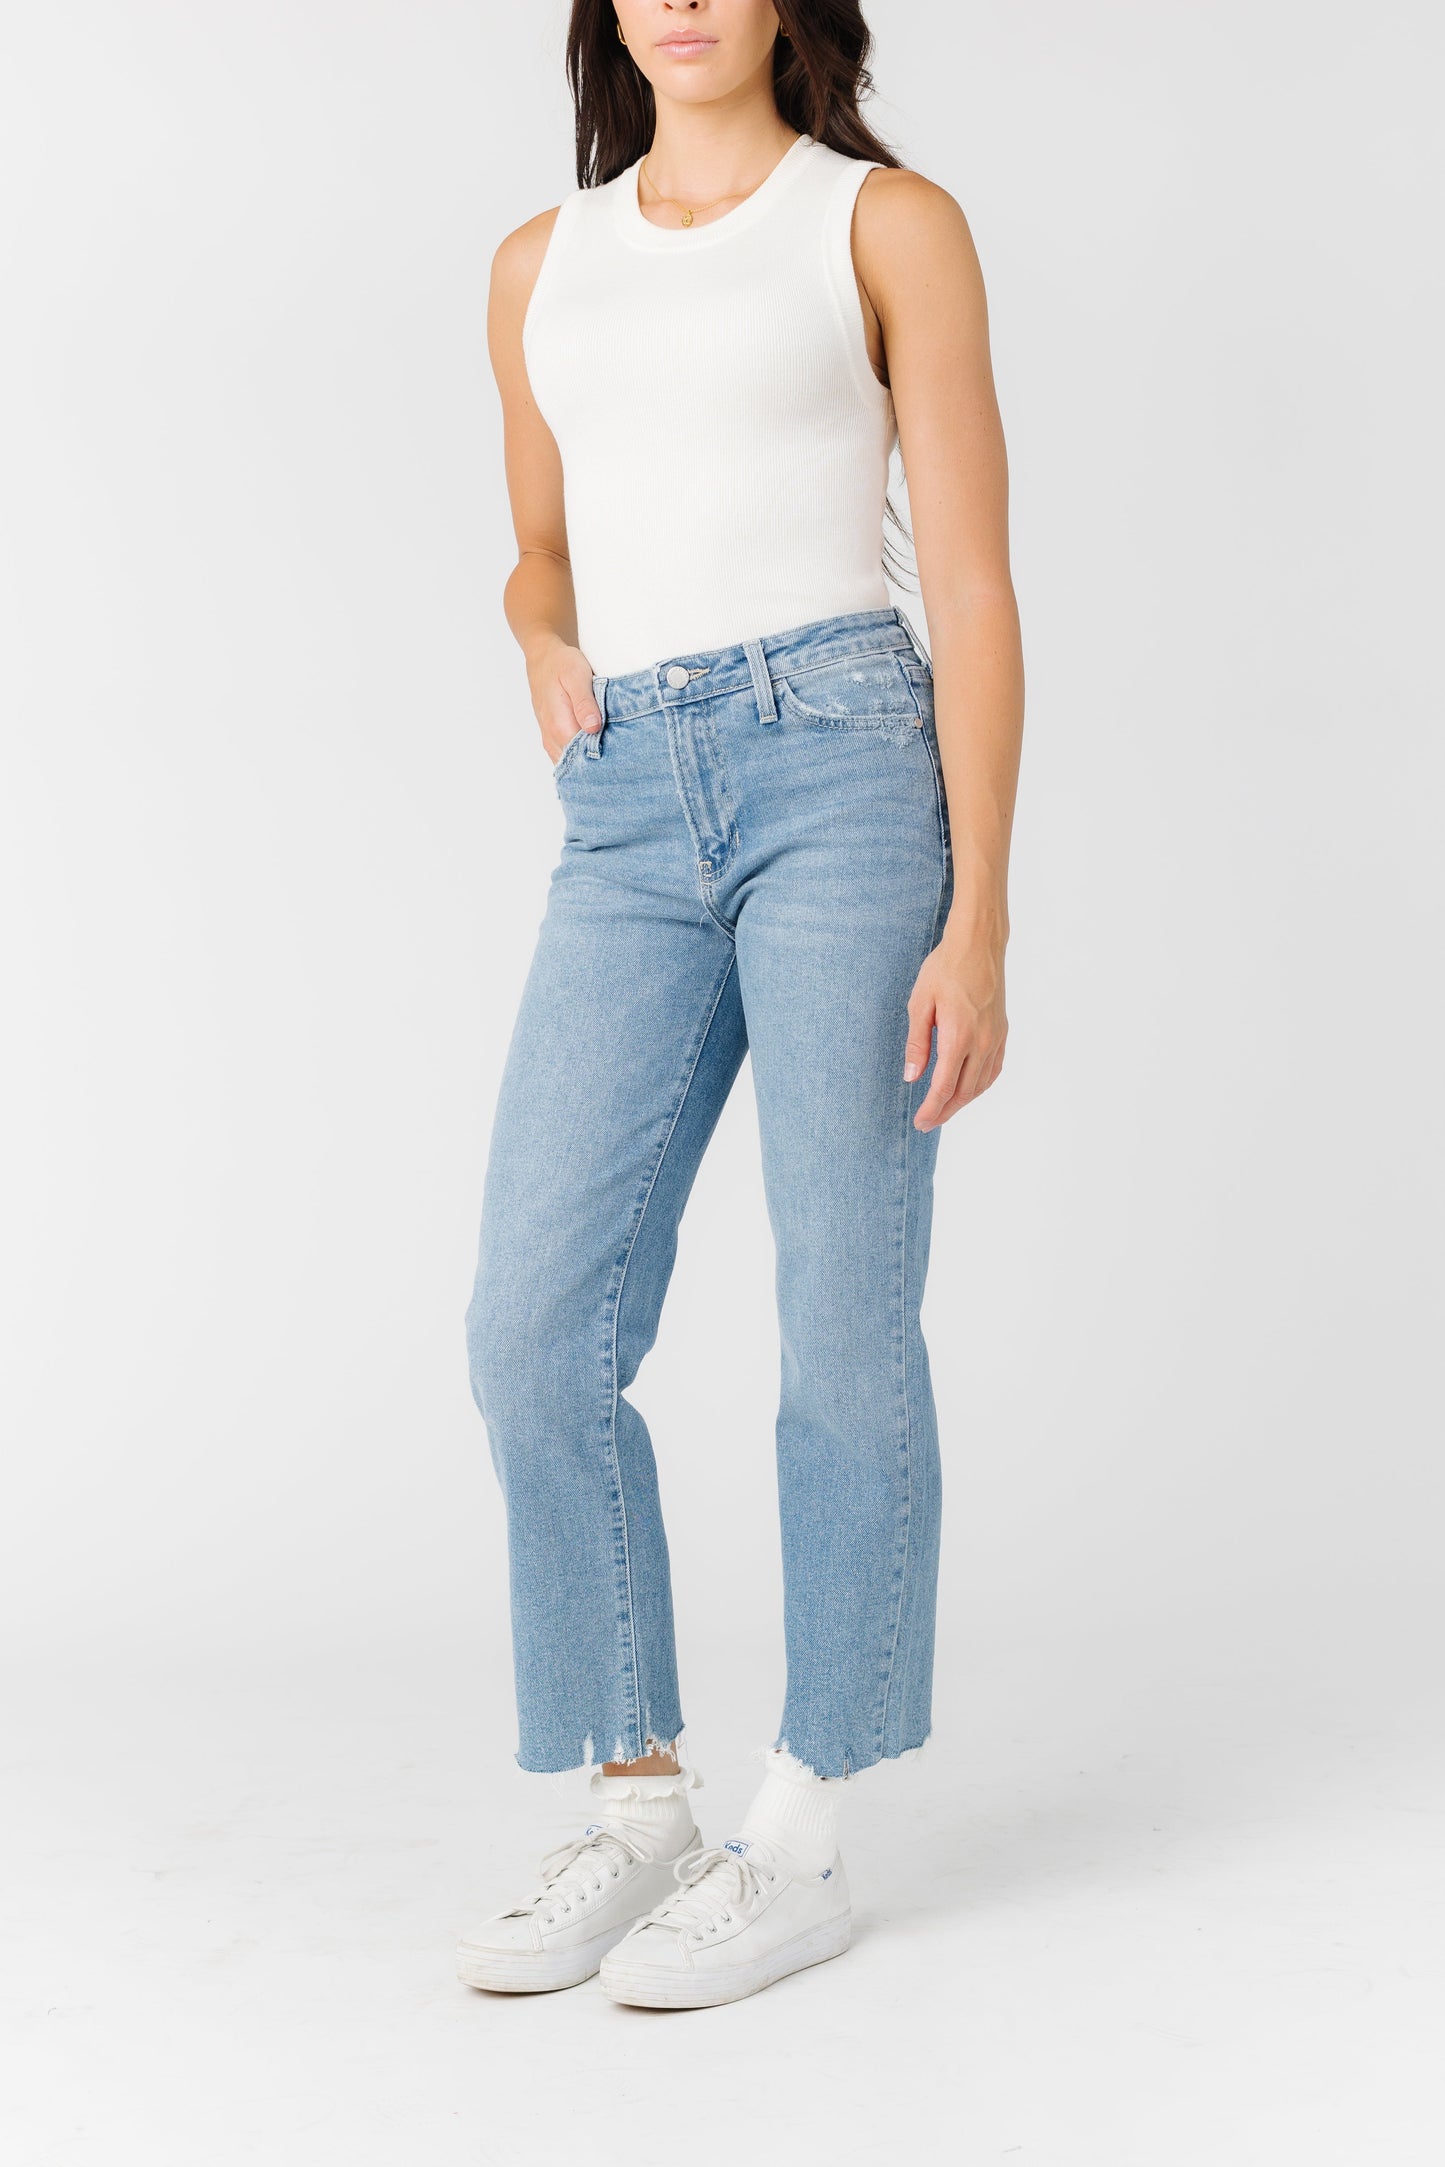 Lost In Time Vintage Straight Jeans WOMEN'S DENIM Just Panmaco Inc. 